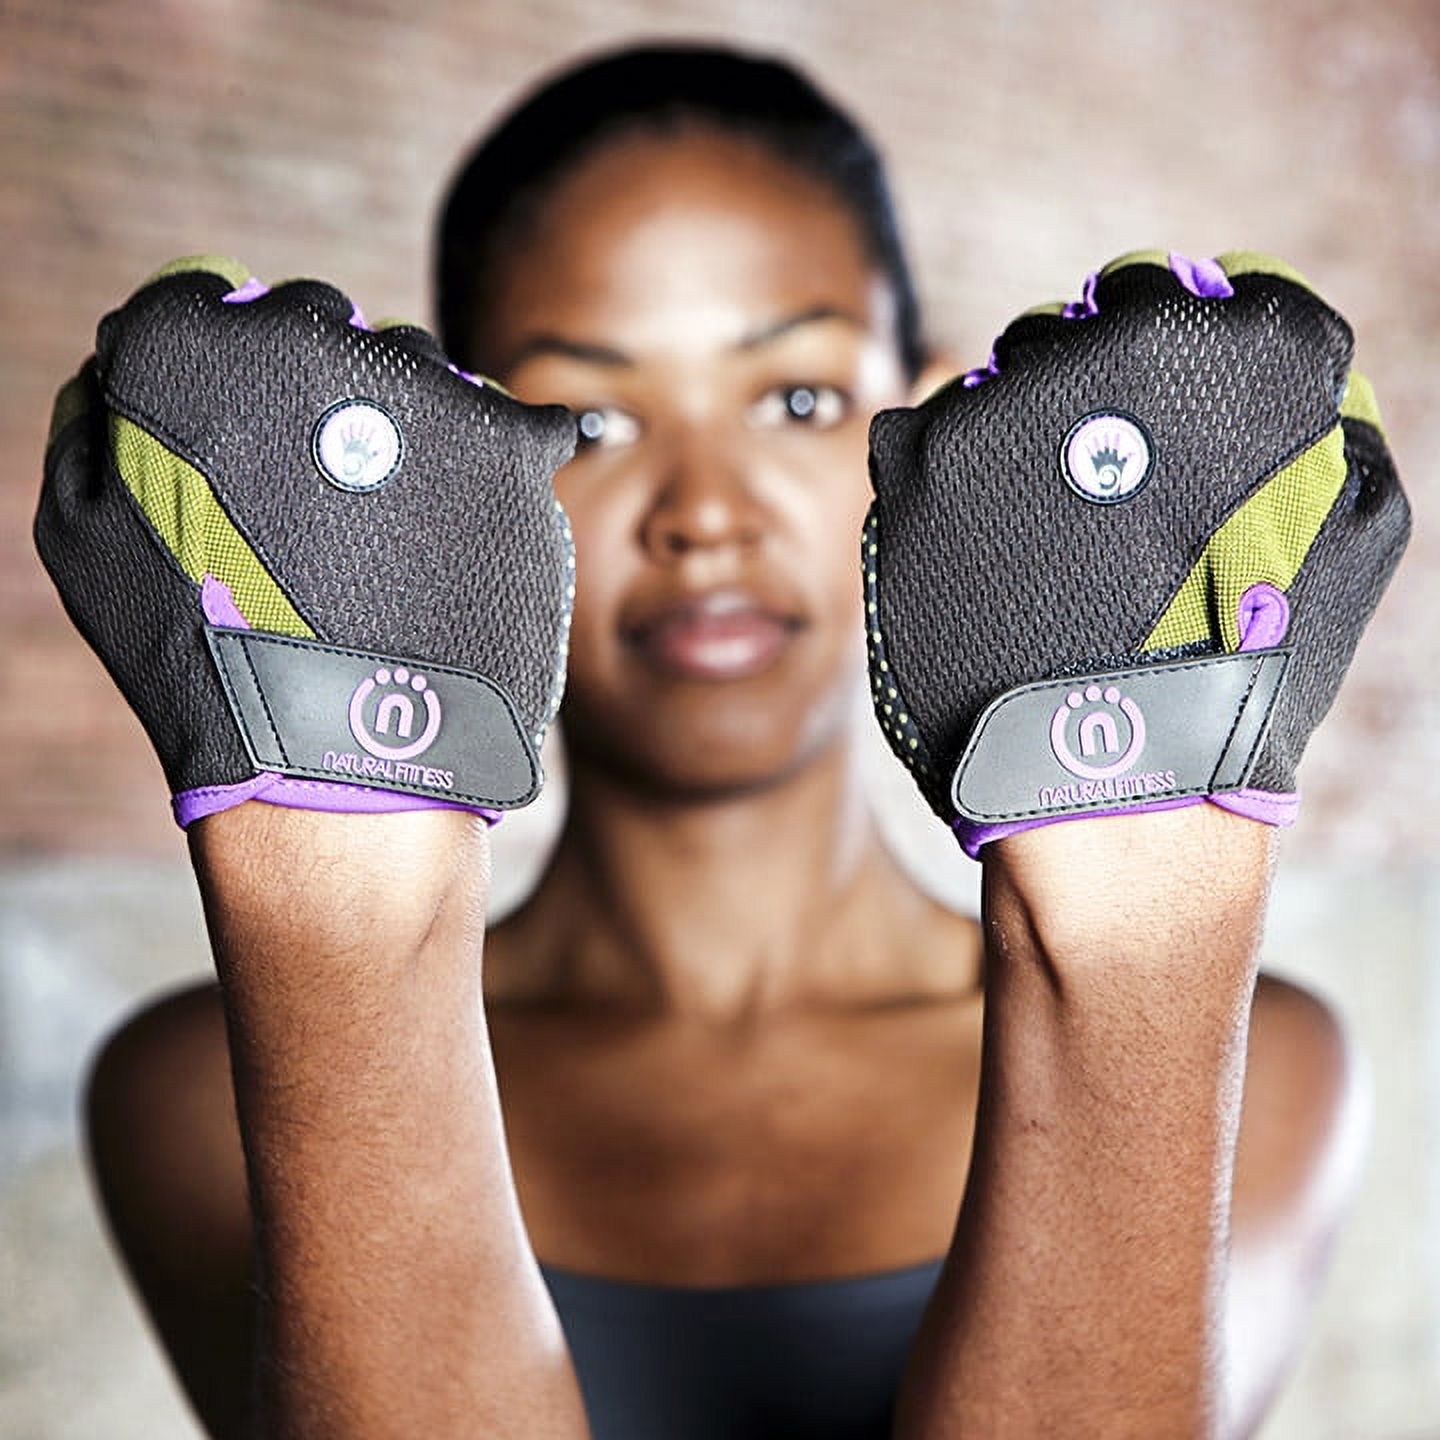 Natural Fitness Wrist Assist Gloves for Extra Support Needed During Yoga, Pilates, Weight-Training, and More – Small - image 3 of 3